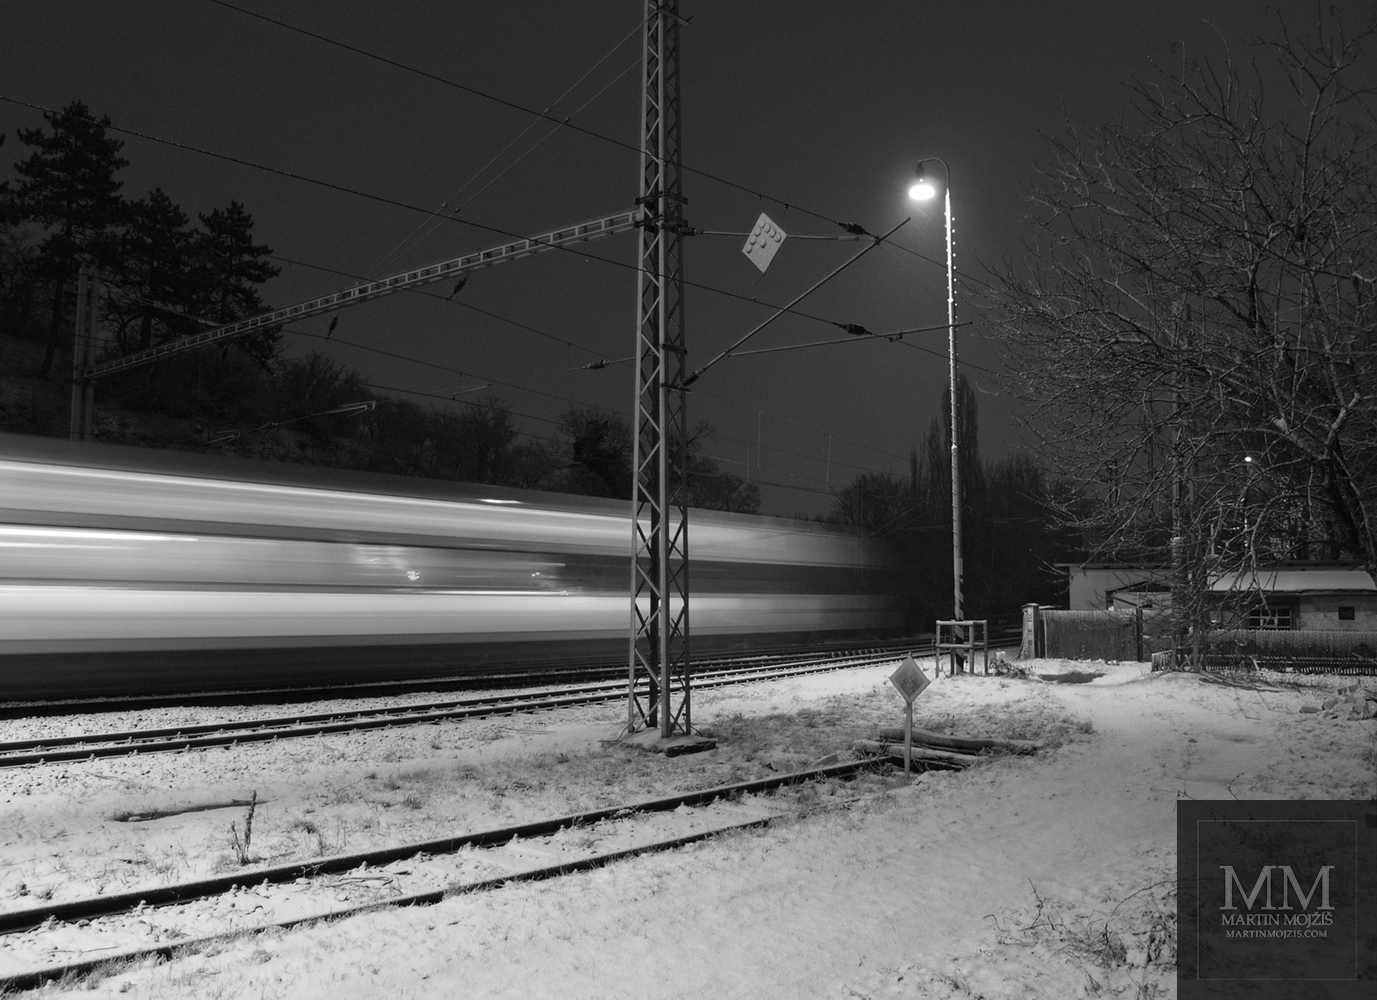 Fast passing train, winter snowy railway station. Photograph with the title NIGHT EXPRESS.